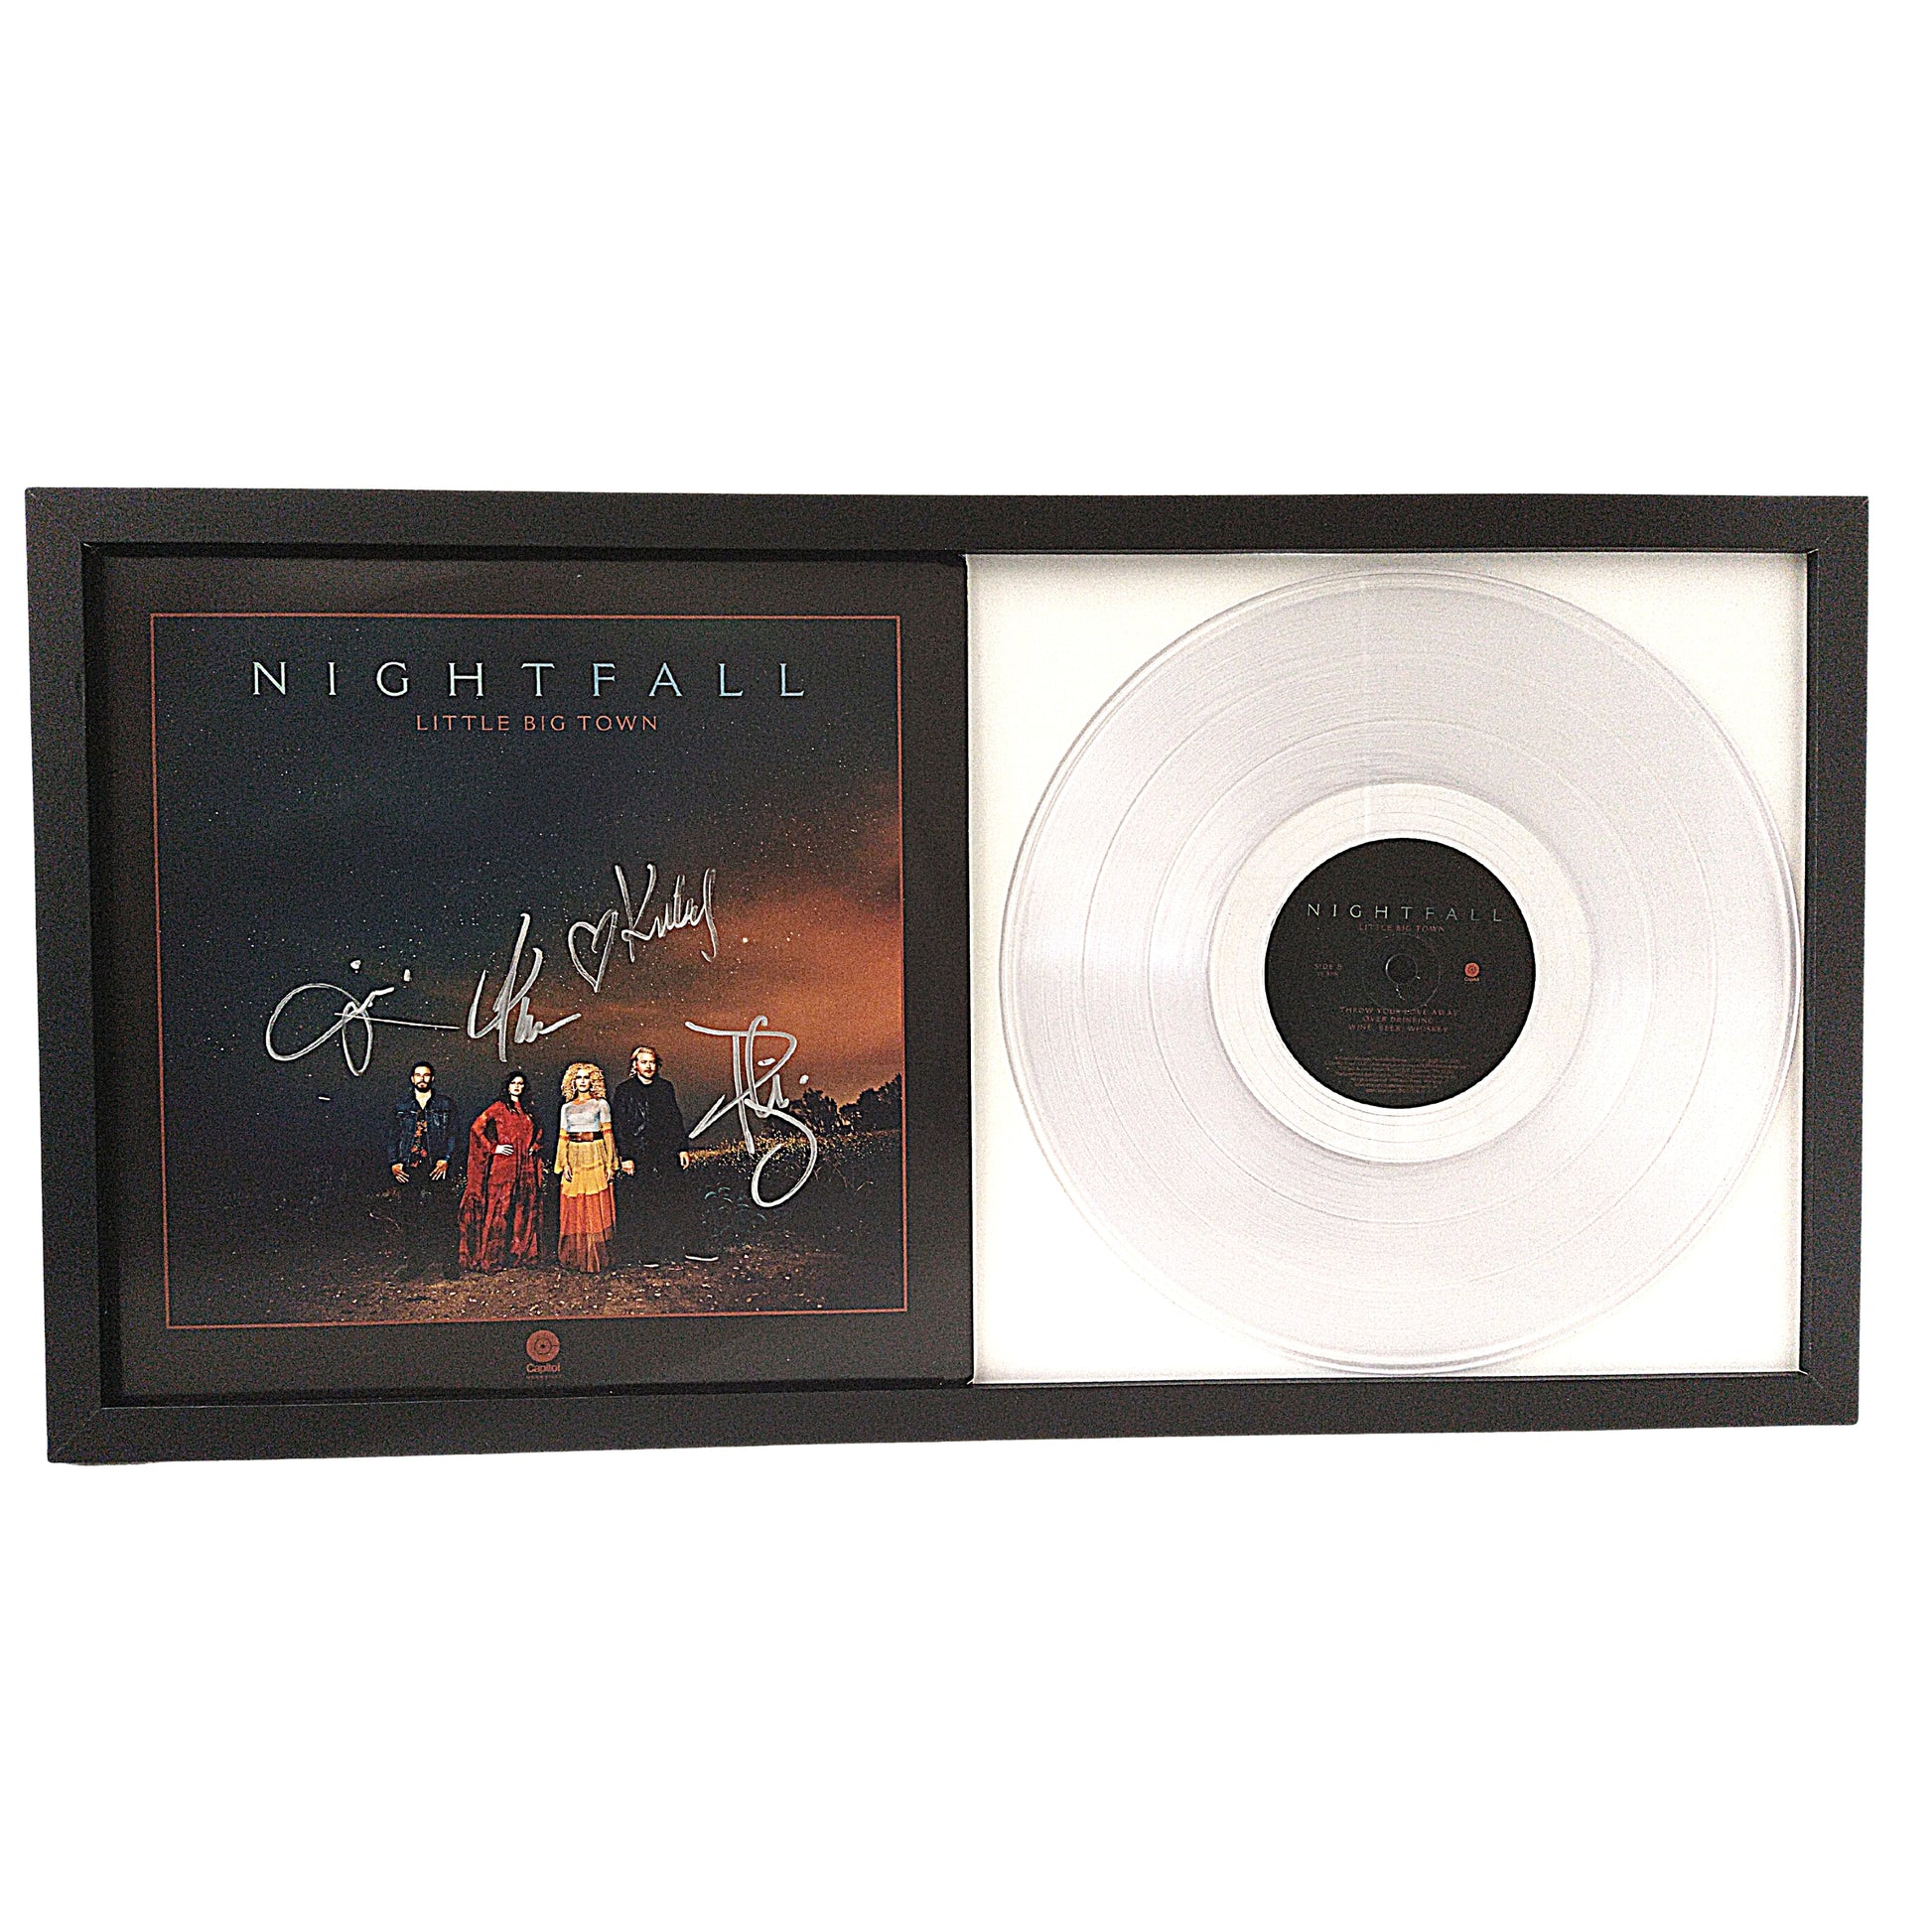 Music- Autographed- Little Big Town Band Signed Nightfall Vinyl Record Album Cover Framed Beckett BAS Authentication 101